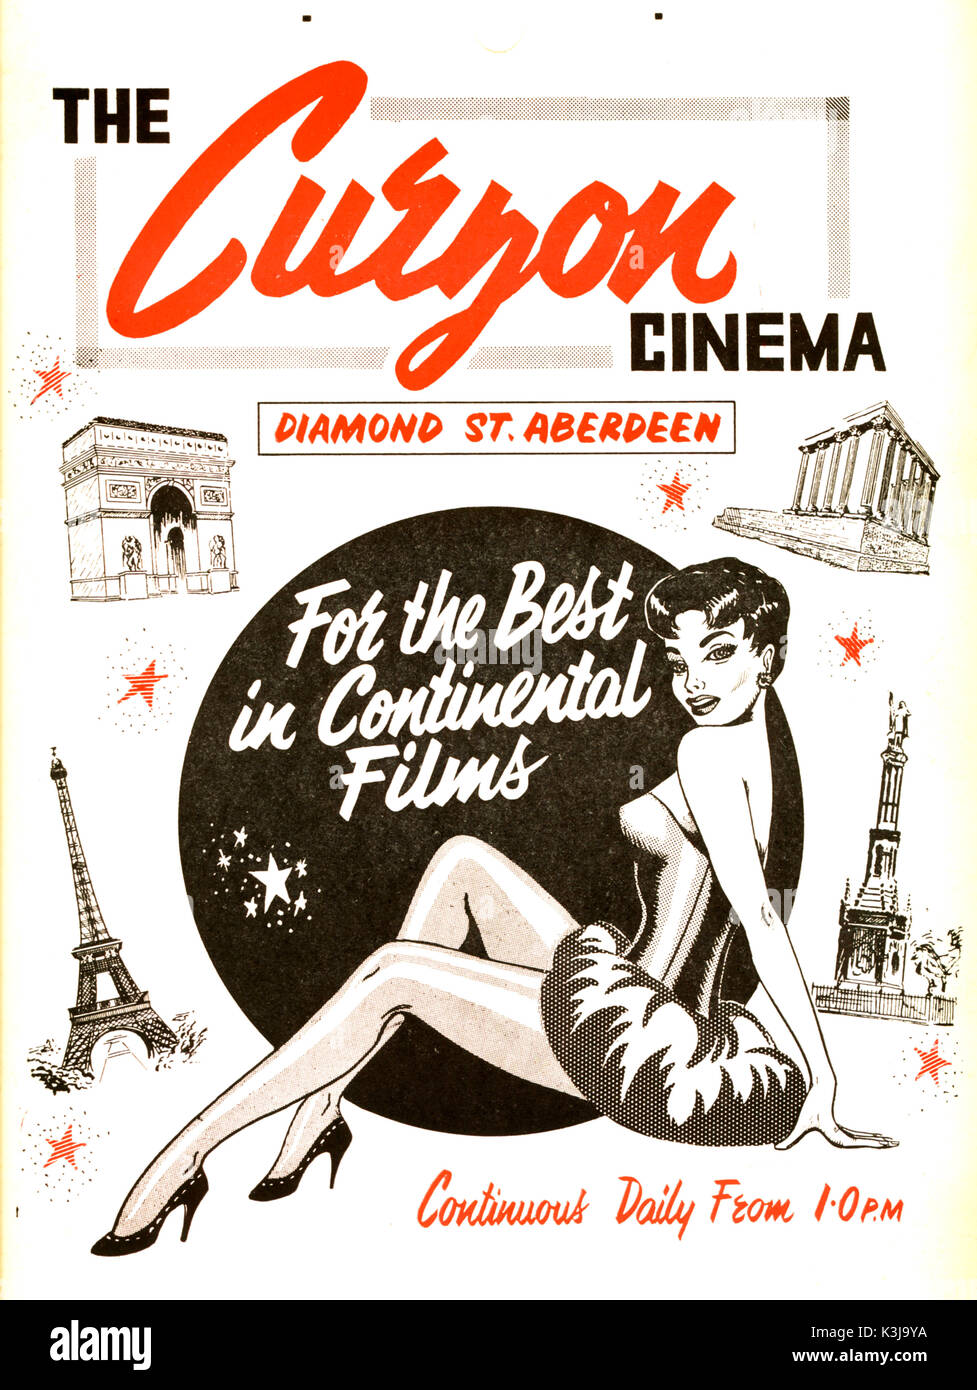 IN THE LATE 1950s AND THE 1960s MANY CINEMAS TRIED SWITCHING TO 'CONTINENTAL' FILMS HOPING THAT THE DECLINE IN ATTENDANCES MIGHT BE HALTED OR SLOWED BY THE PROMISE OF SEEING MORE SEXUALLY DARING MATERIAL.  THIS CINEMA IN ABERDEEN WAS OPENED IN 1936 AS THE NEWS CINEMA, SHOWING THE LATEST NEWS FILMS [NEWSREELS] PUNCTUATED WTH DOCUMENTARY, TRAVEL, COMEDY AND CARTOON SHORT FILMS AND CHANGED TO THE CURZON IN 1959. IN THE LATE 1950s AND THE 1960s MANY CINEMAS TRIED SWITCHING TO 'CONTINENTAL' FILMS HOPING THAT THE DECLINE IN ATTENDANCES MIGHT BE HALTED OR SLOWED BY THE PROMISE OF SEEING MORE SEXUALLY Stock Photo